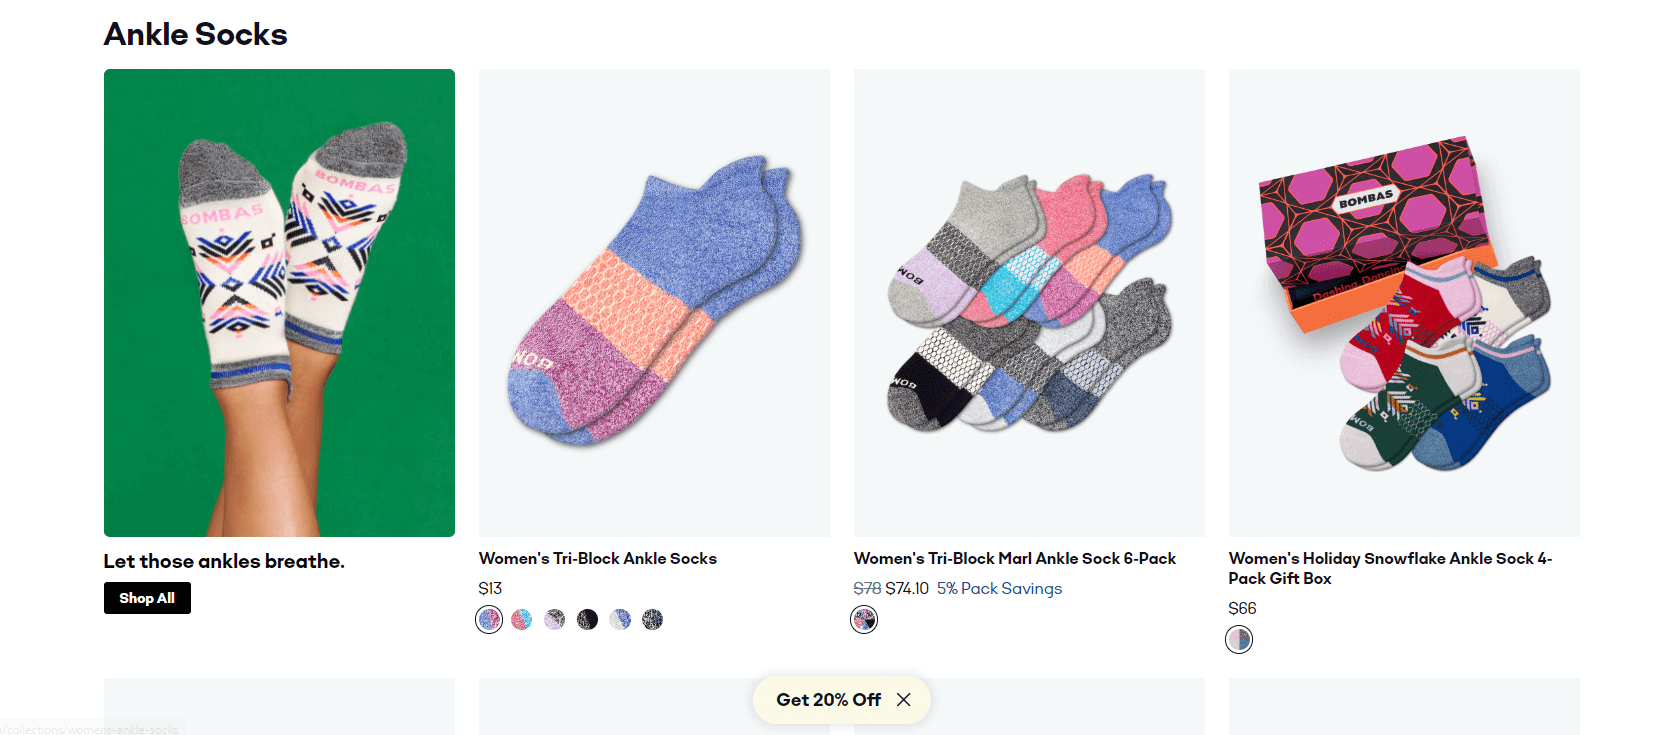 Featured products showing ankle socks.